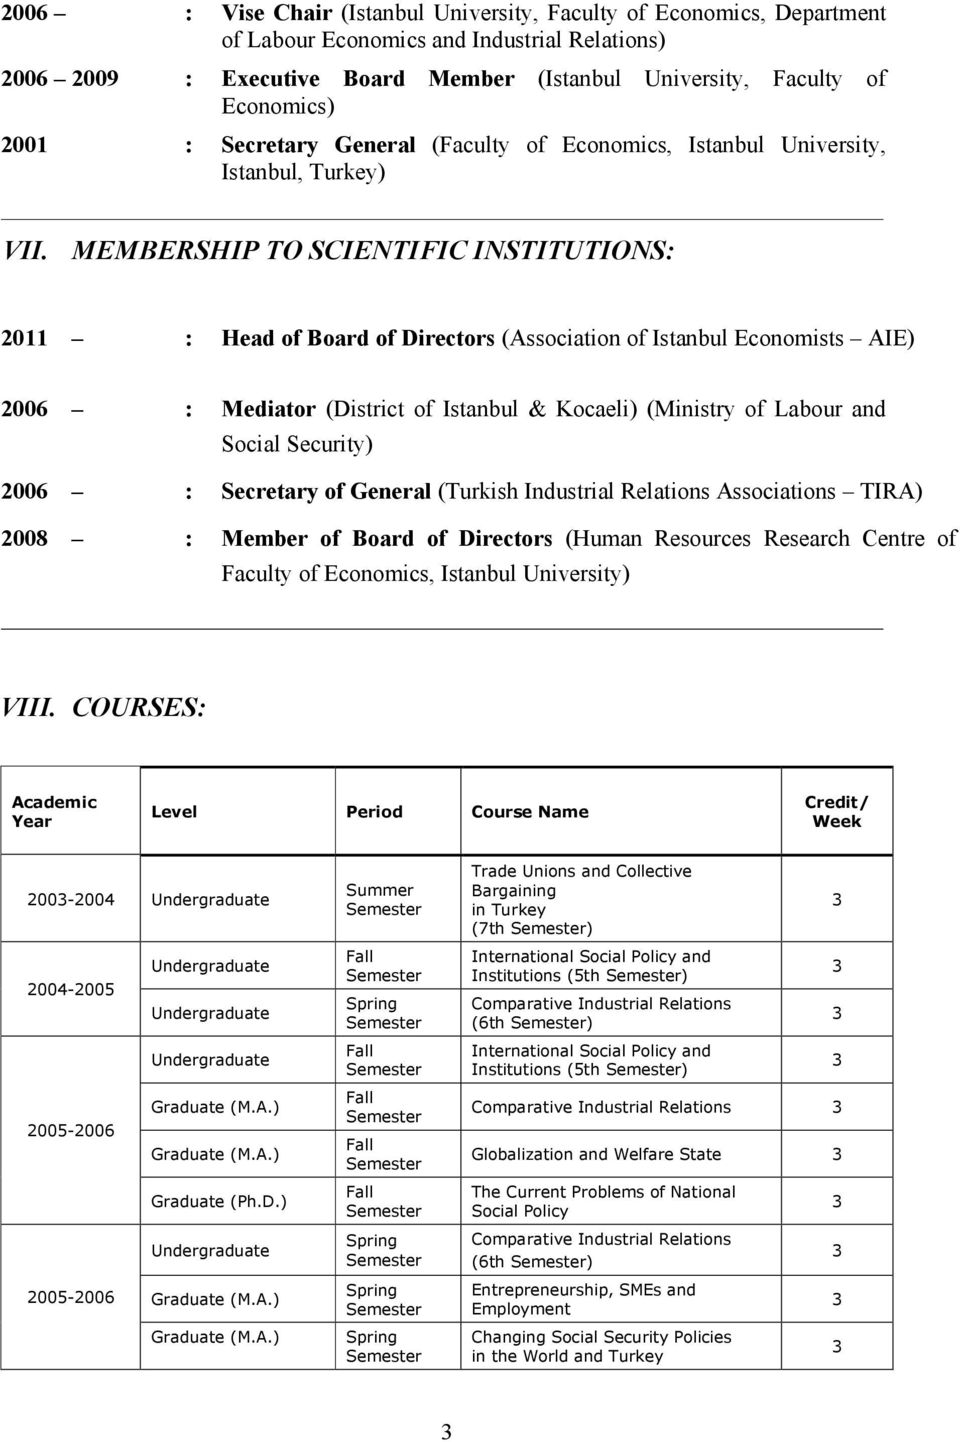 MEMBERSHIP TO SCIENTIFIC INSTITUTIONS: 2011 : Head of Board of Directors (Association of Istanbul Economists AIE) 2006 : Mediator (District of Istanbul & Kocaeli) (Ministry of Labour and Social